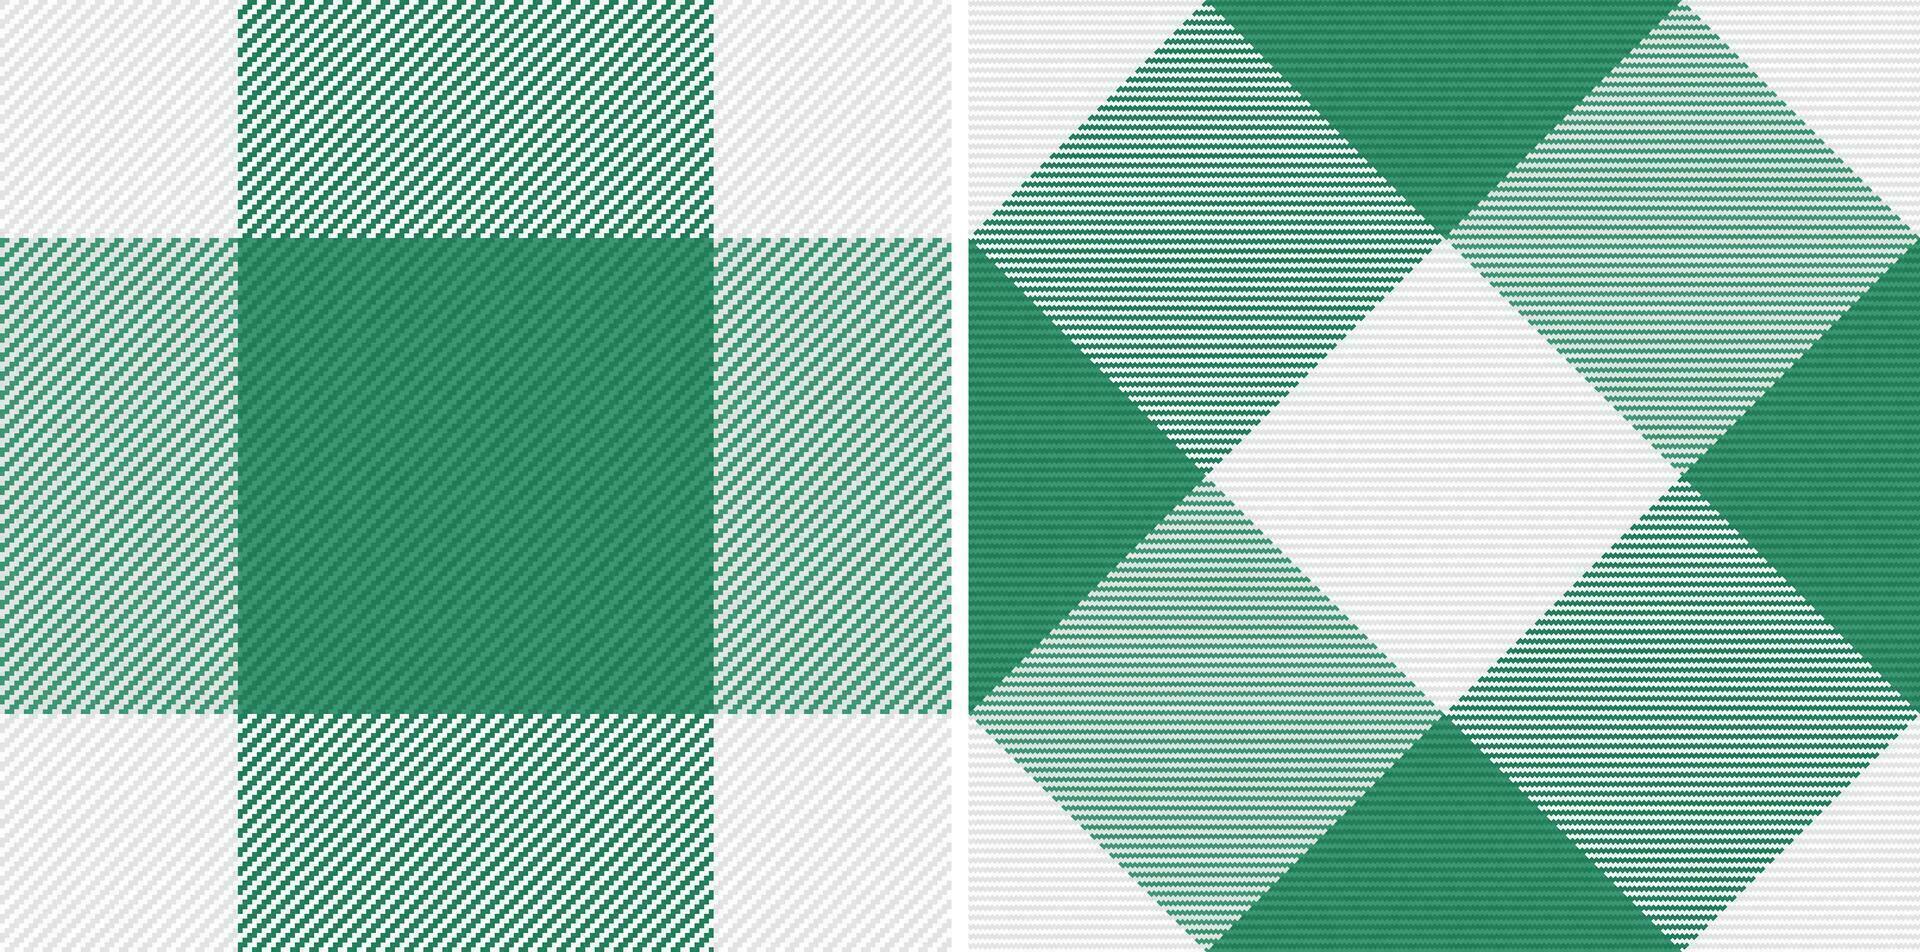 Pattern tartan fabric of check background vector with a seamless textile texture plaid.